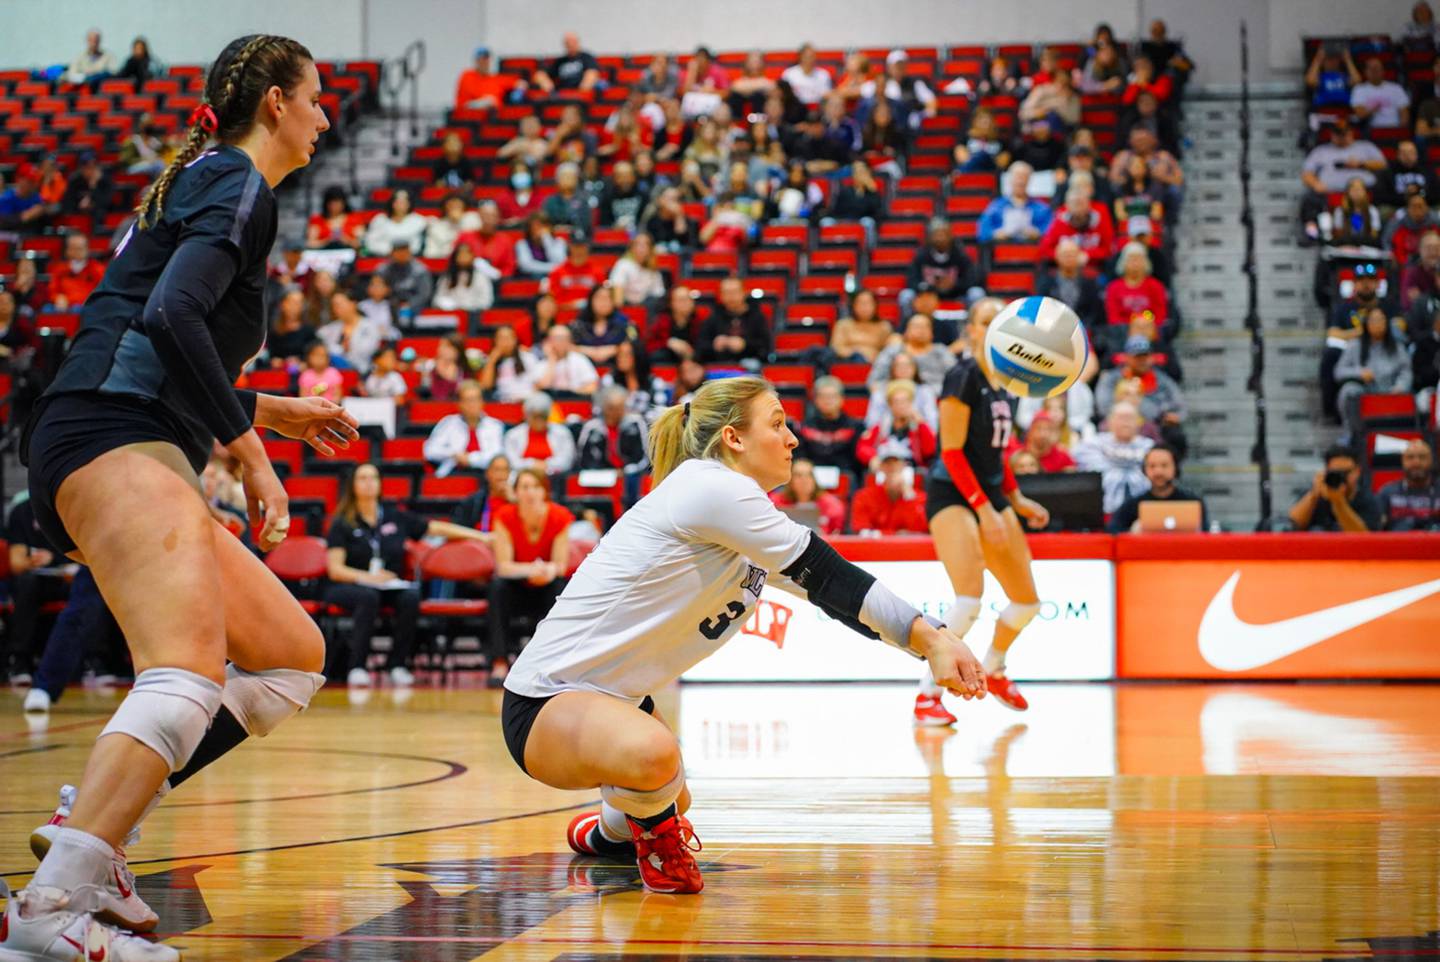 Rock Falls native Maya Sands digs the ball during a UNLV volleyball match at Cox Pavilion in Las Vegas this past season. Sands started all season at libero for UNLV, and is transferring to Missouri for next season.